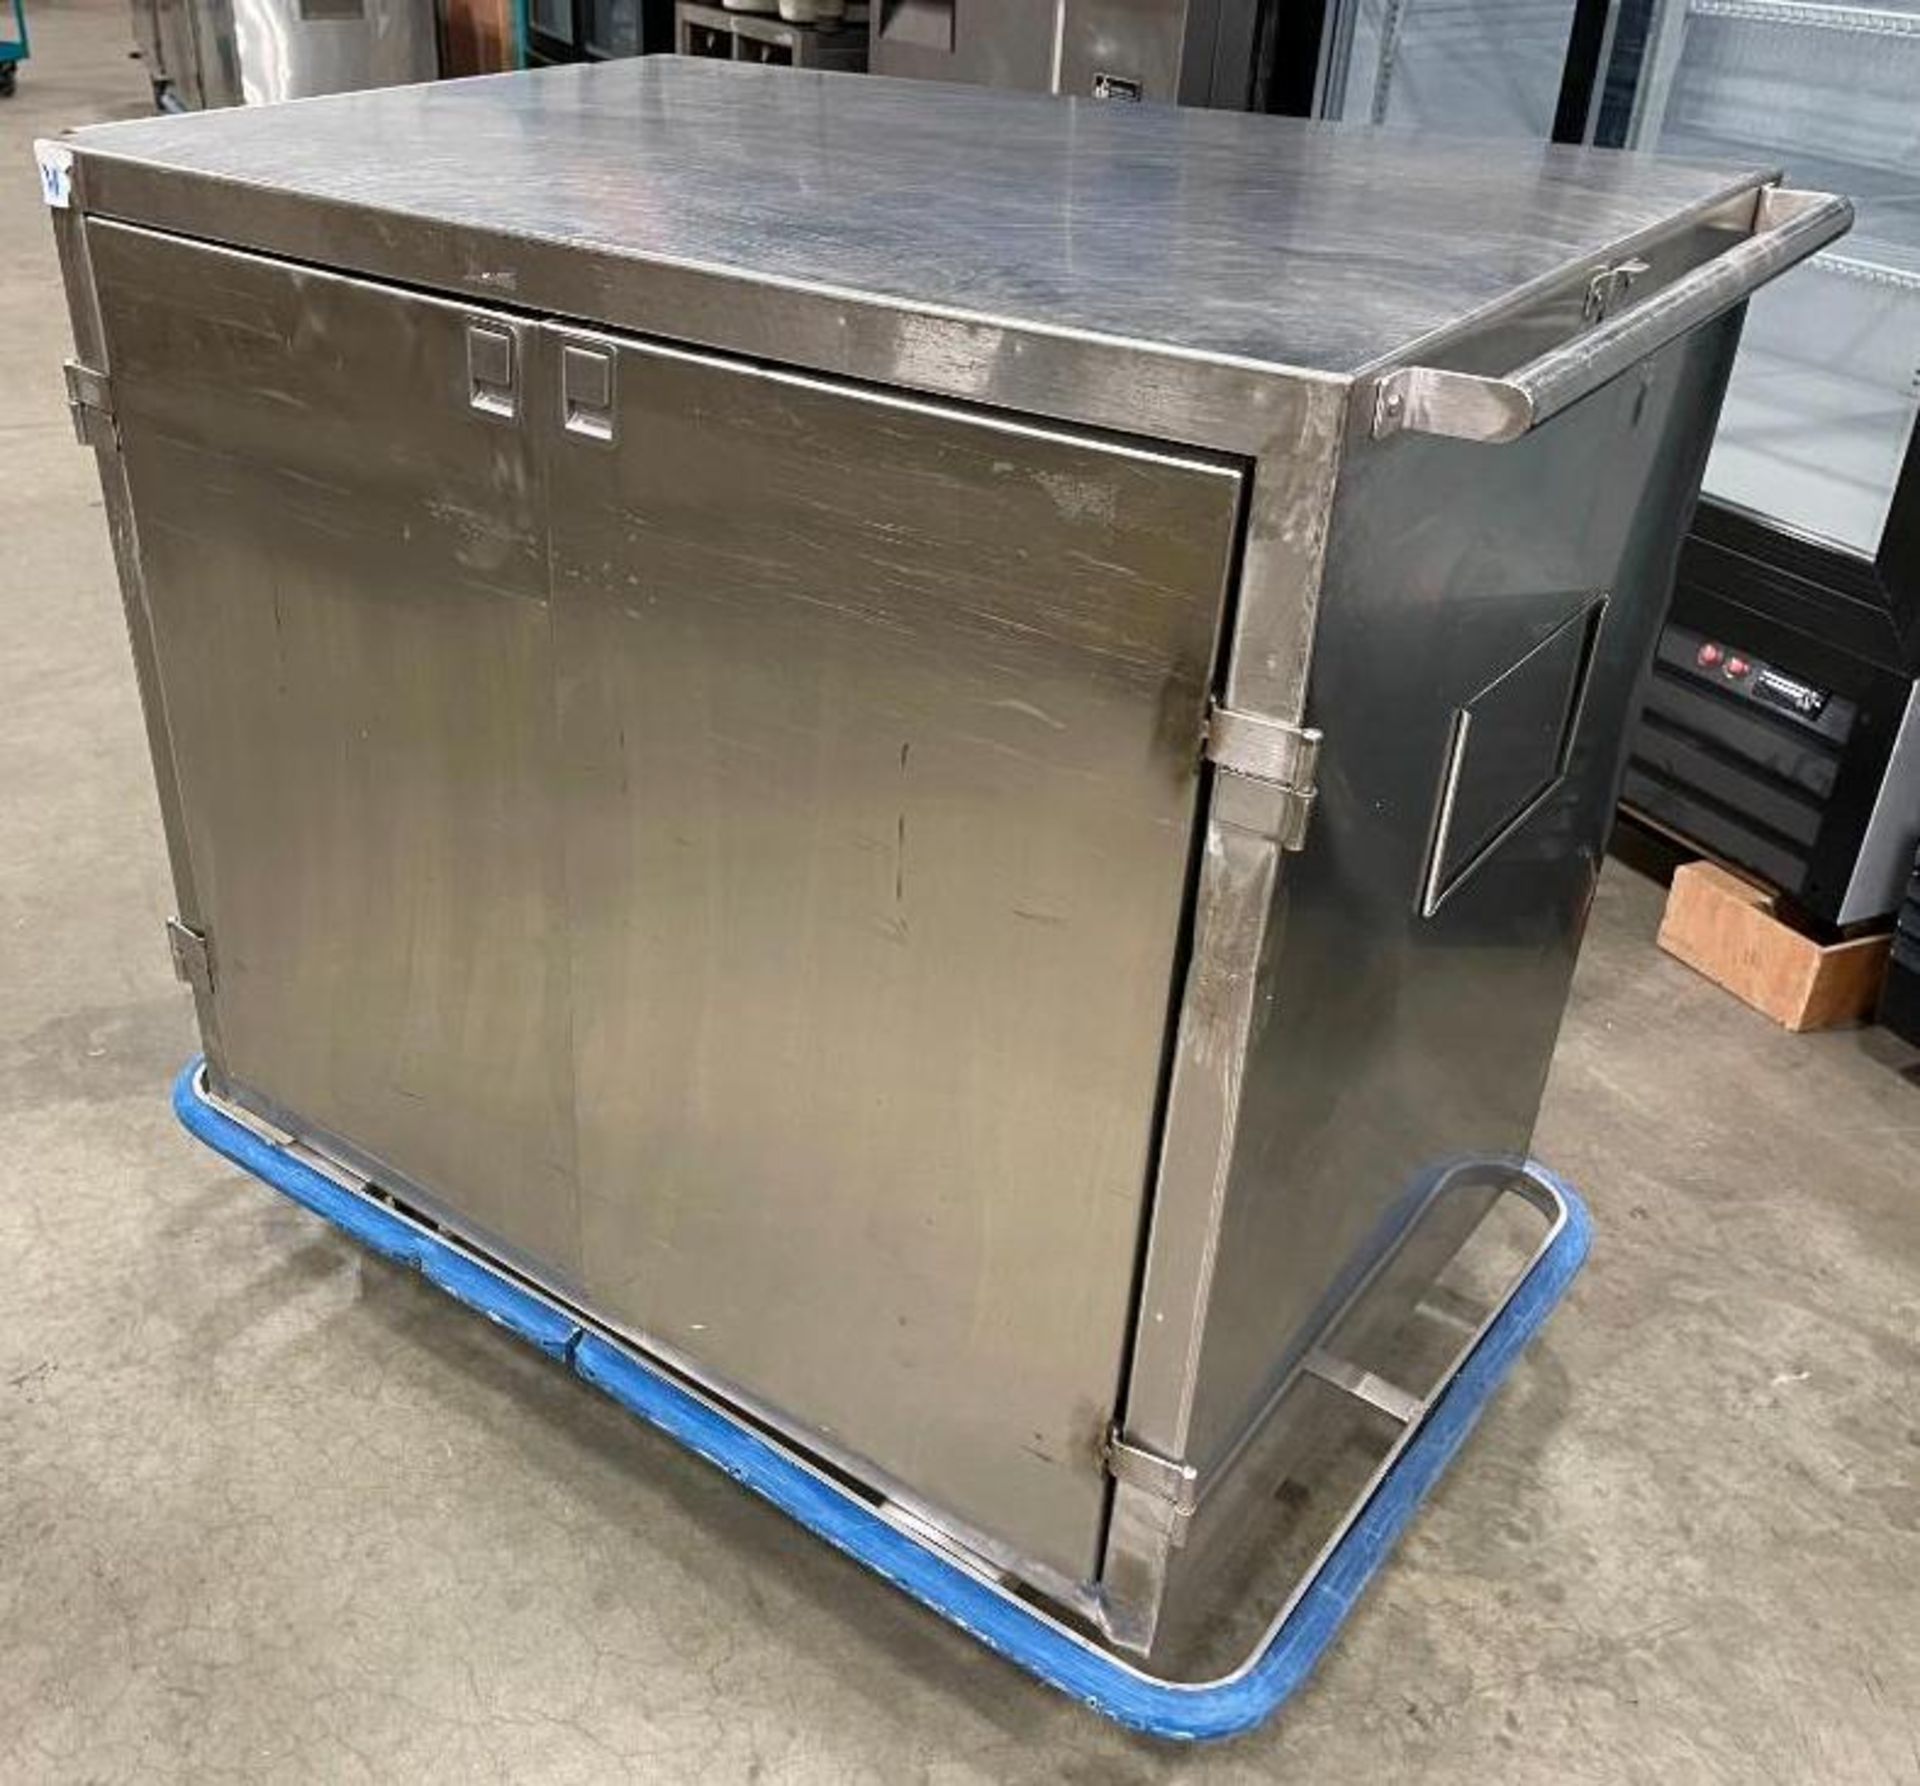 36" X 24" STAINLESS STEEL MOBILE CABINET